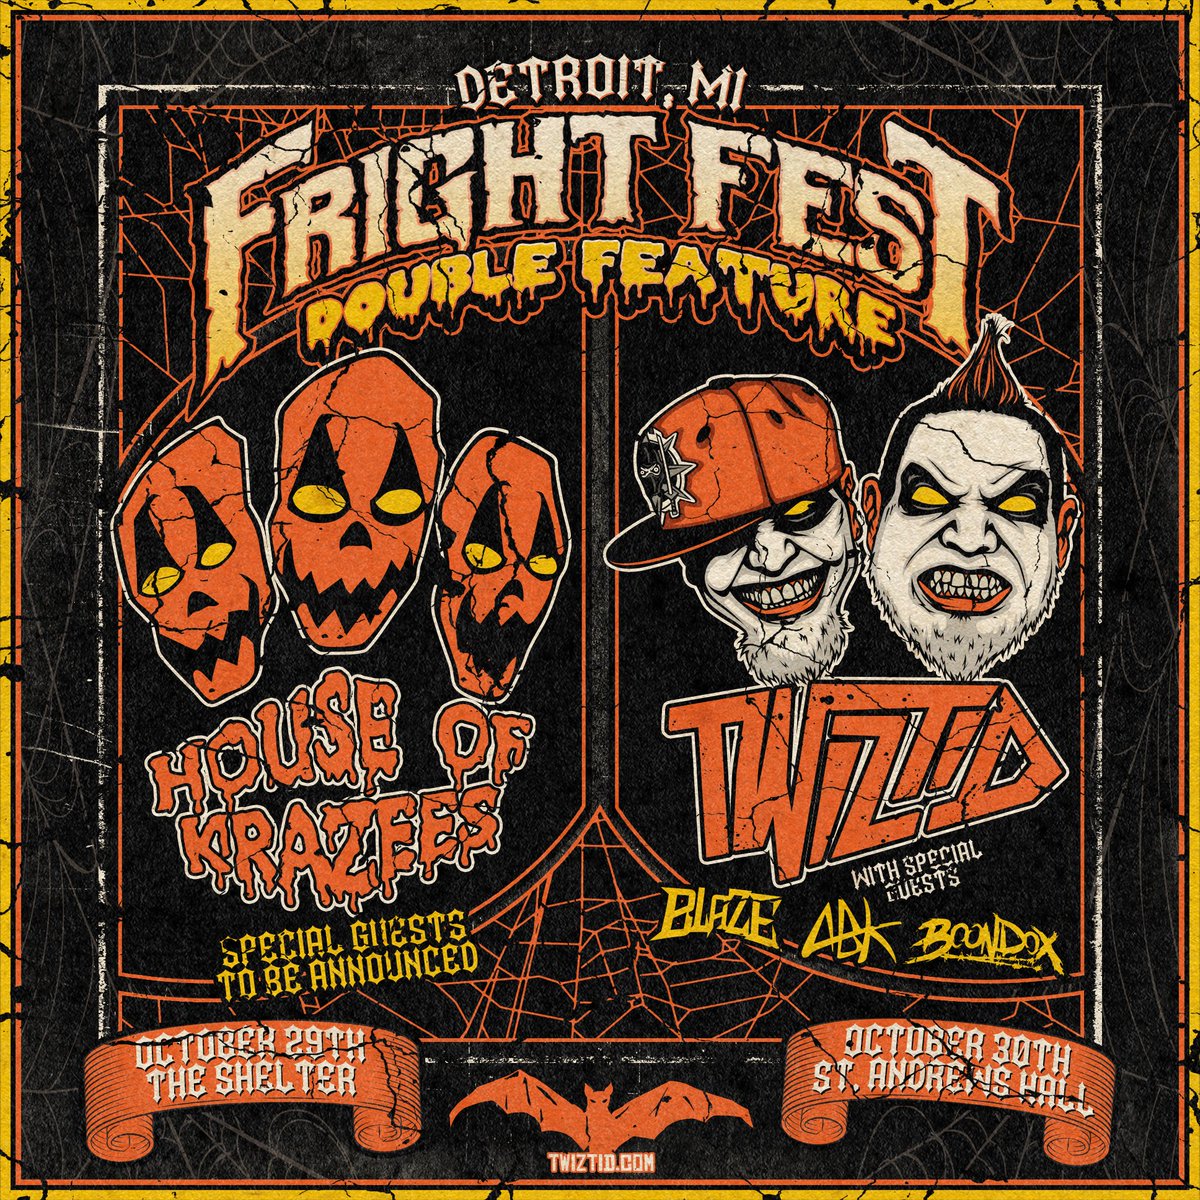 October 29 & 30, MNE presents FRIGHT FEST: DOUBLE FEATURE with not one, but two nights of Krazee & Twiztid performances! Each ticket purchased to the October 29 House of Krazees show at The Shelter will allow entry to the October 30 Twiztid Fright Fest show.
Onsale Fri @ 10am.